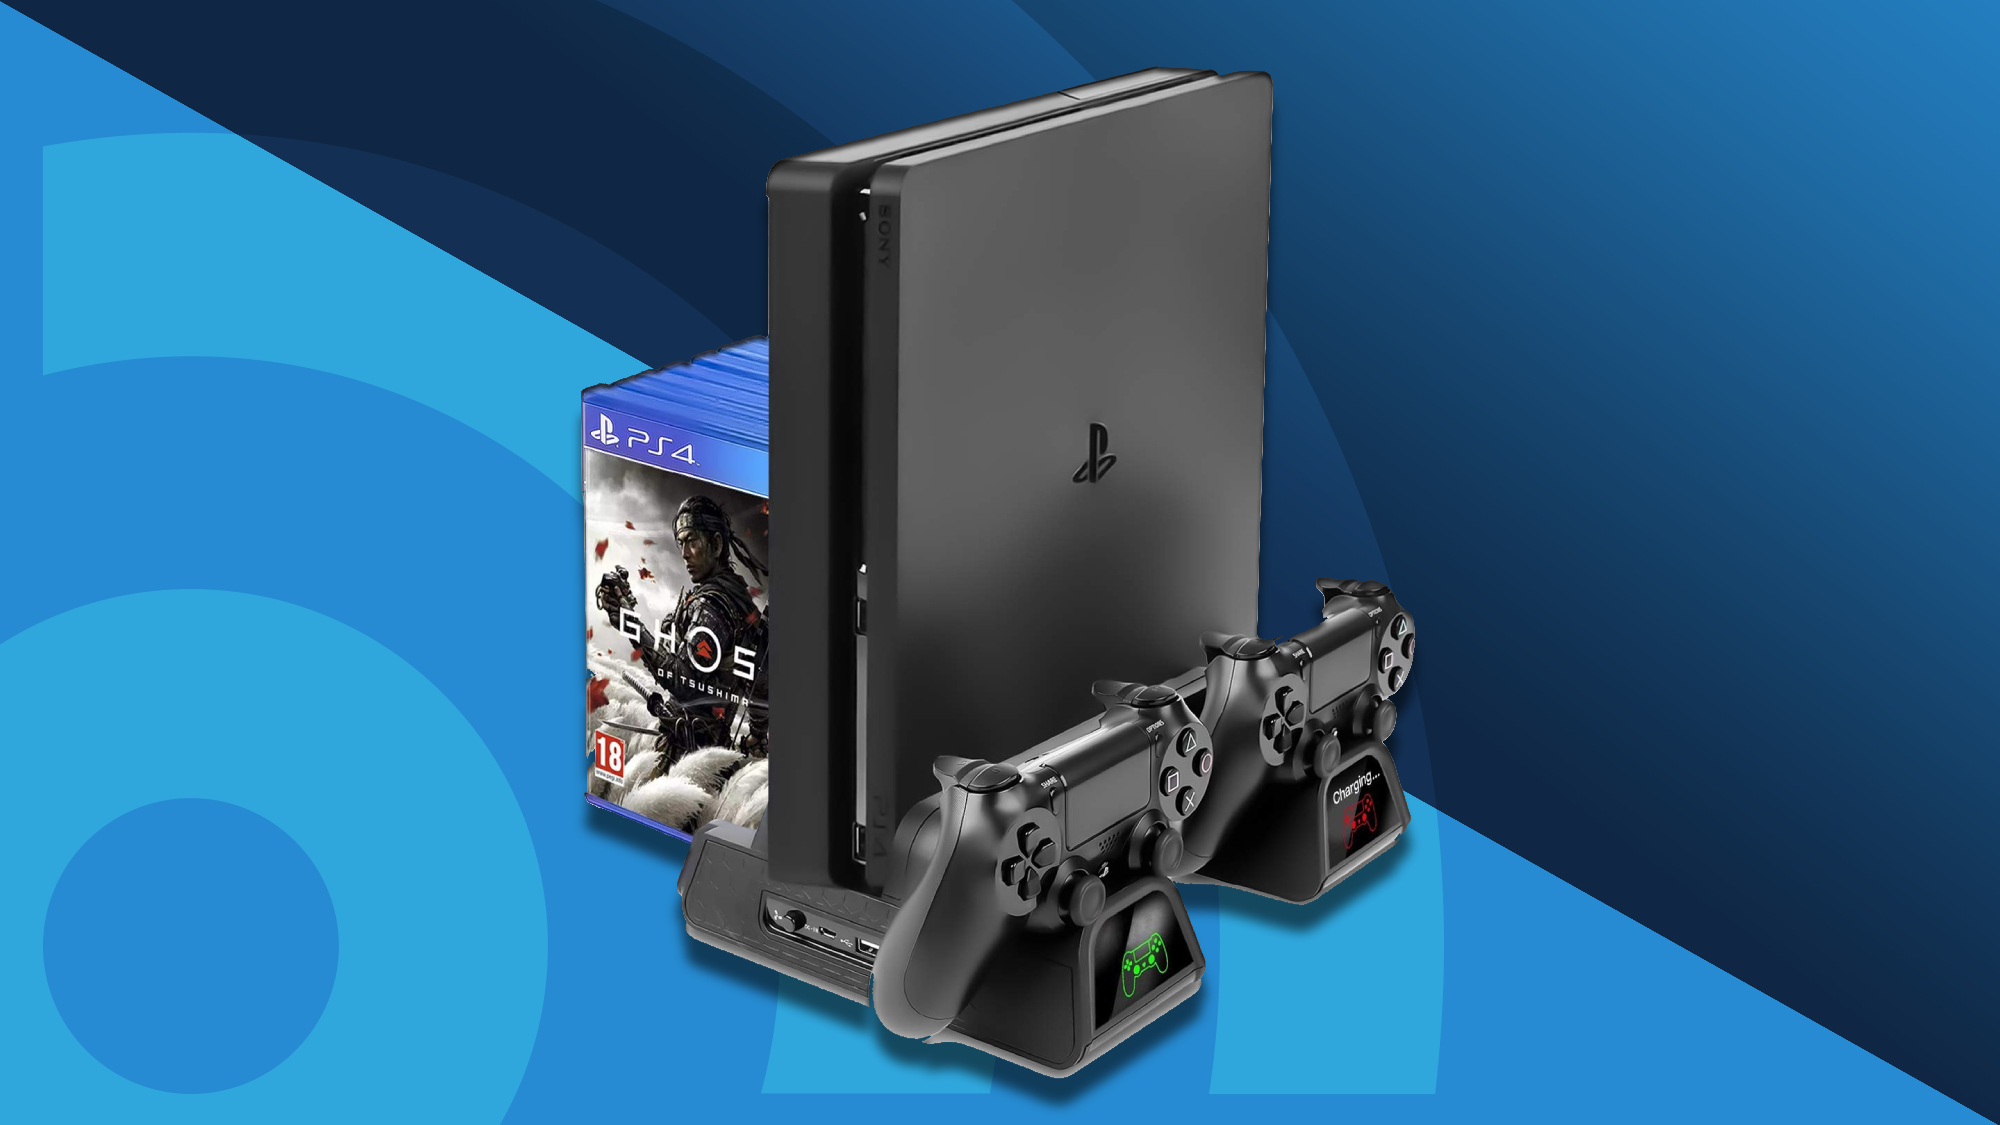 A quieter Sony PlayStation 4 Pro is now available, but only with